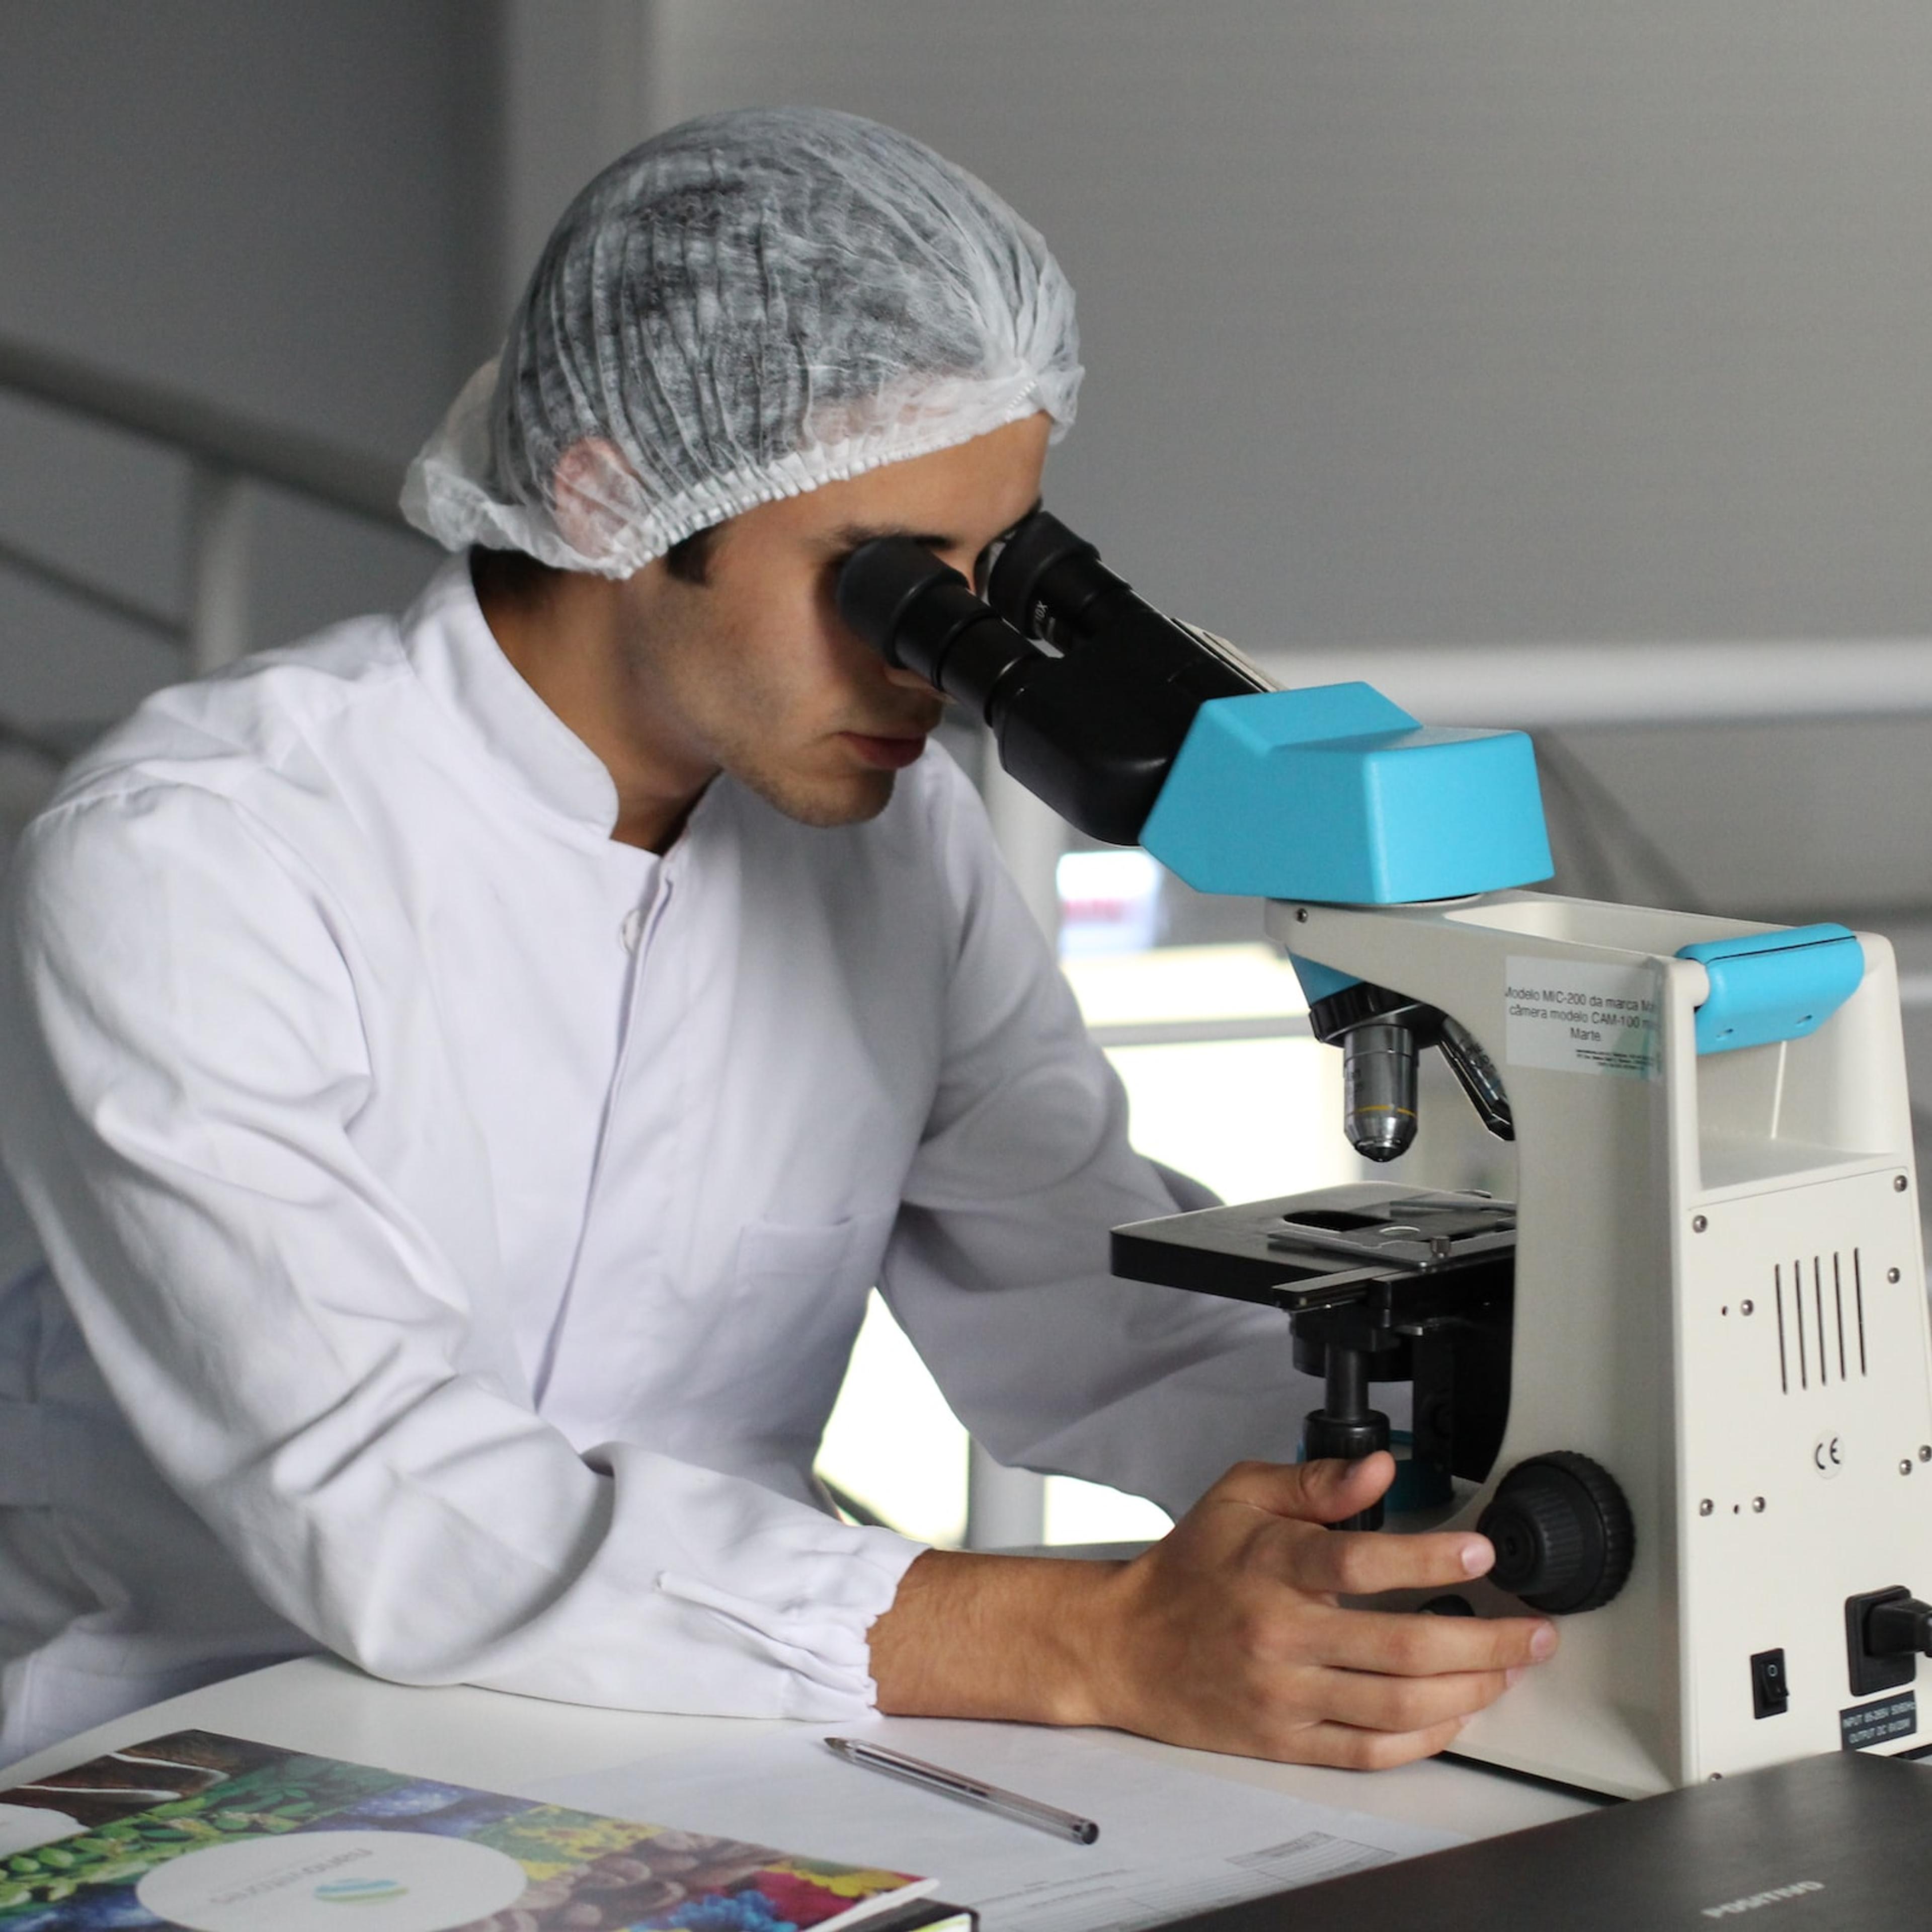 Researcher studying something in a microscope